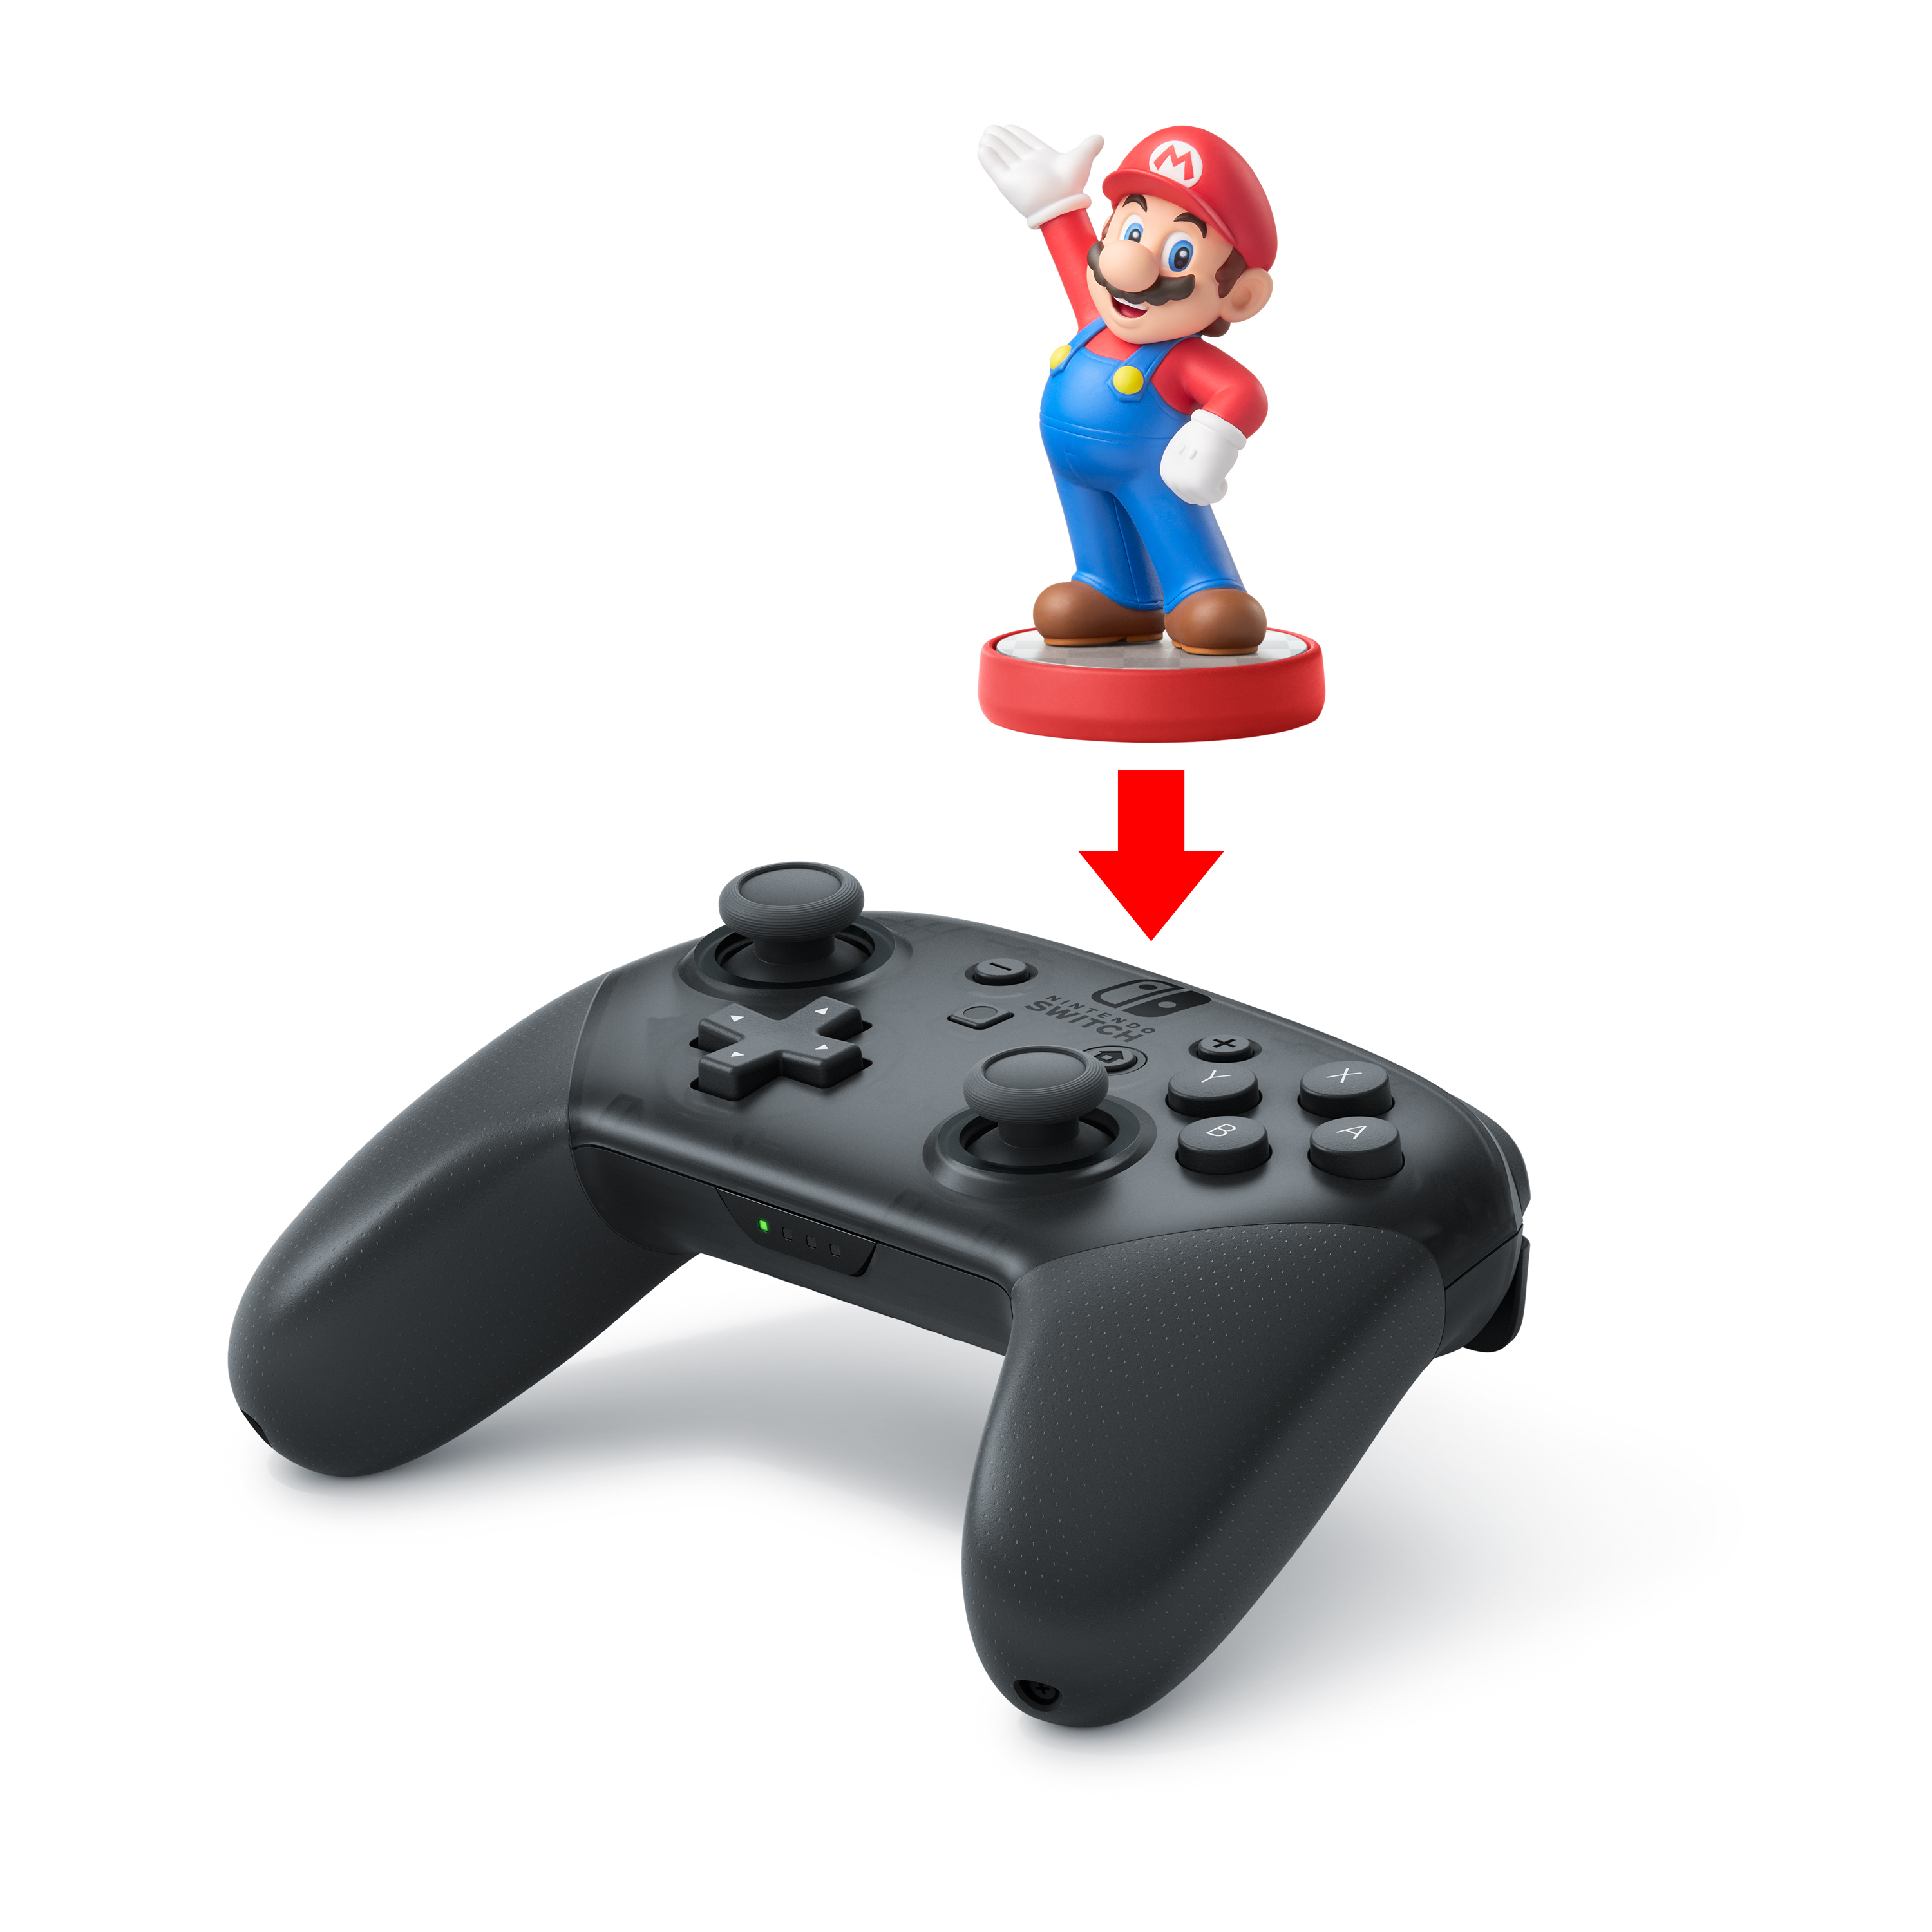 can i use switch pro controller on wii u